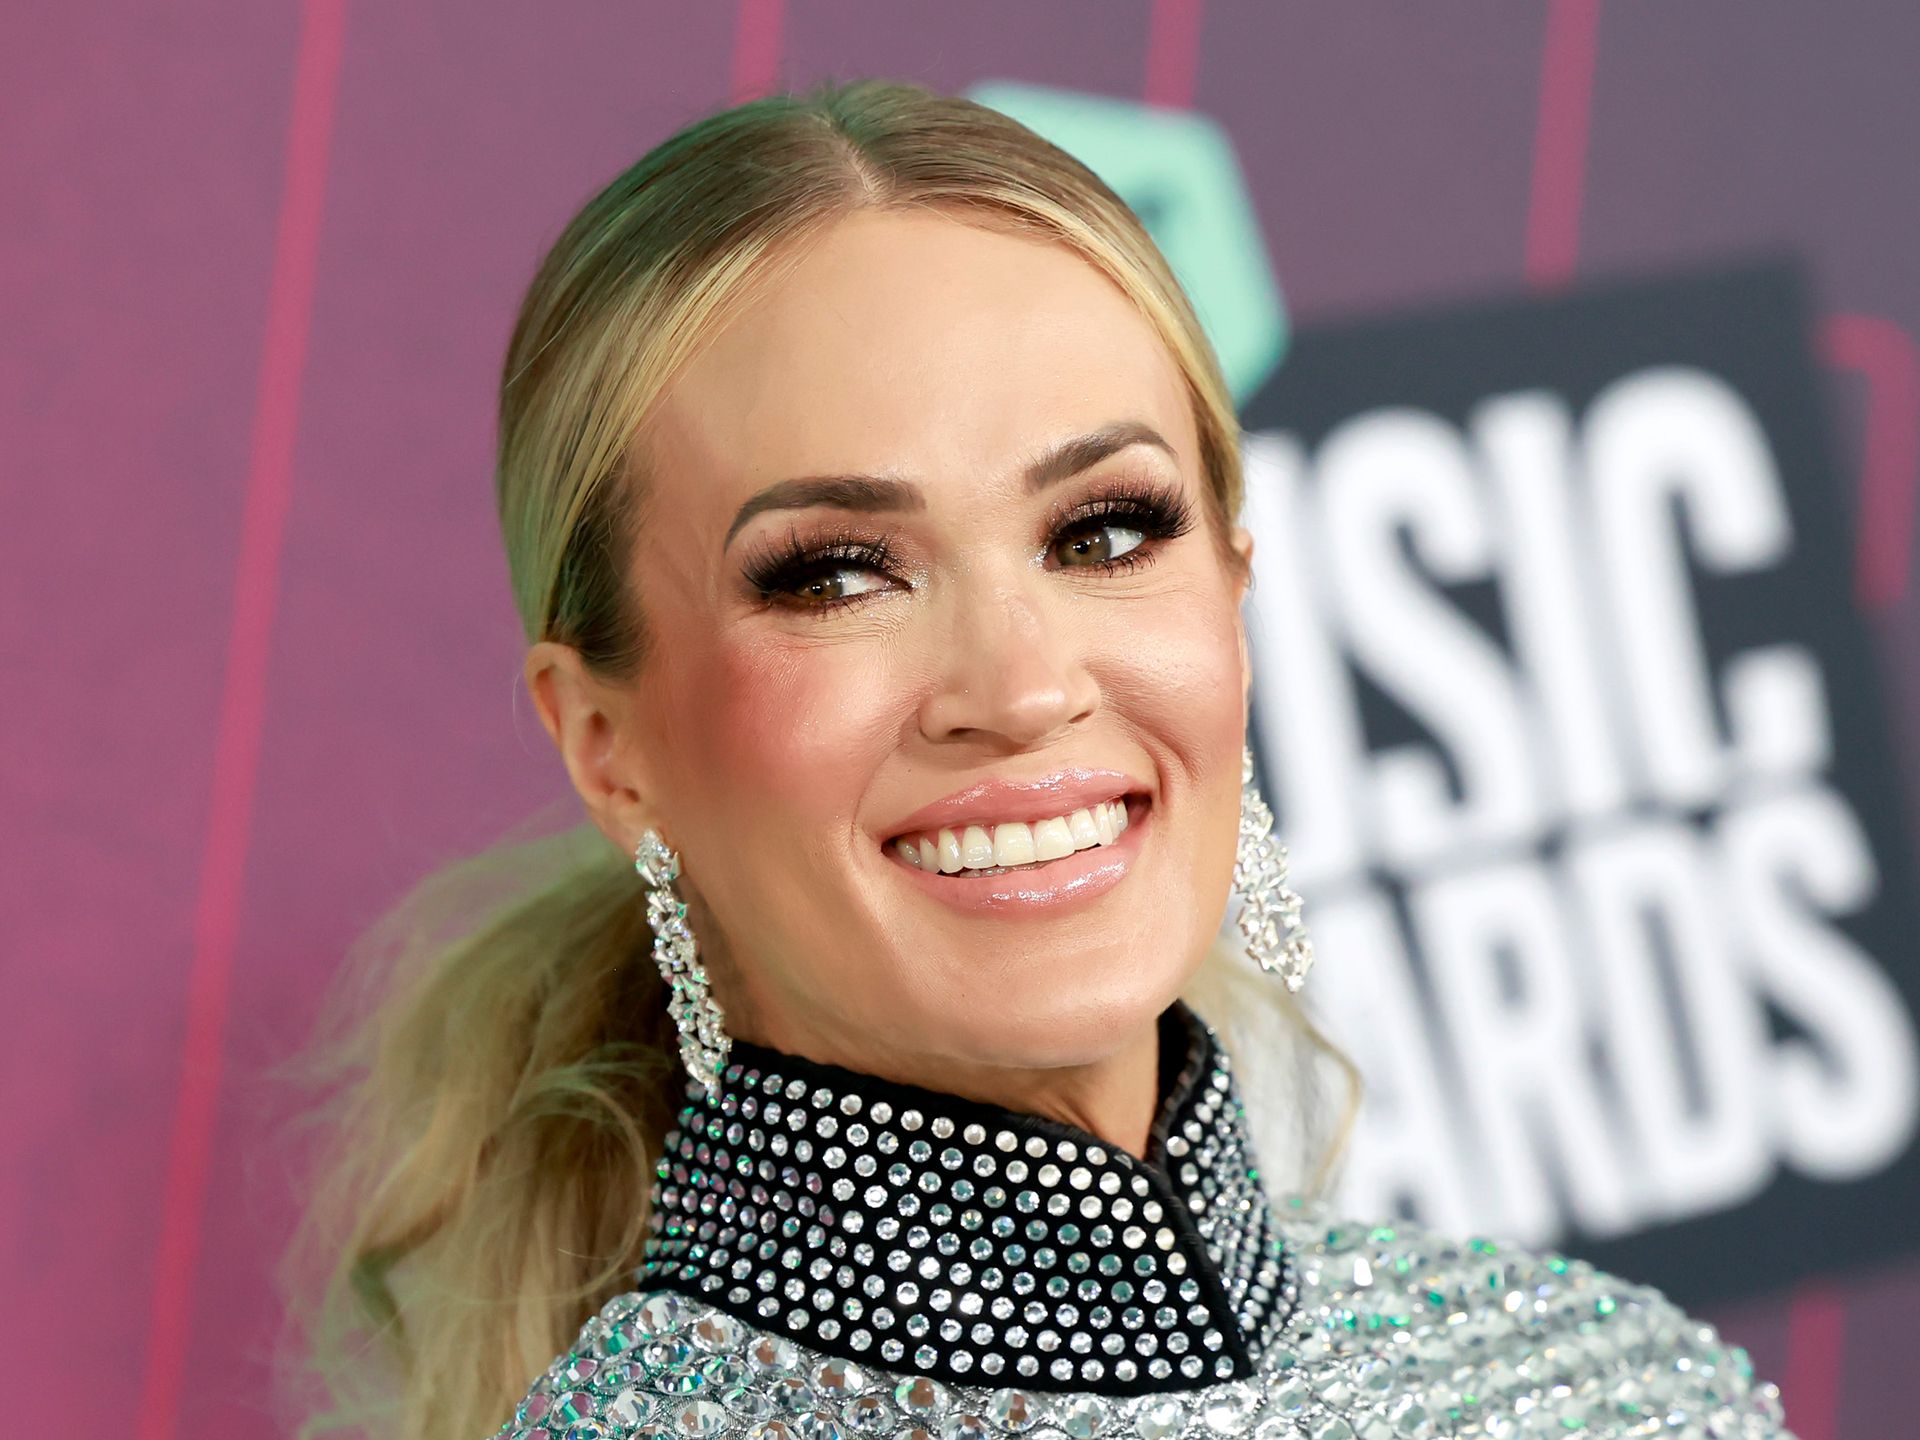 Carrie Underwood's ultra-toned legs steal the show in a metallic romper